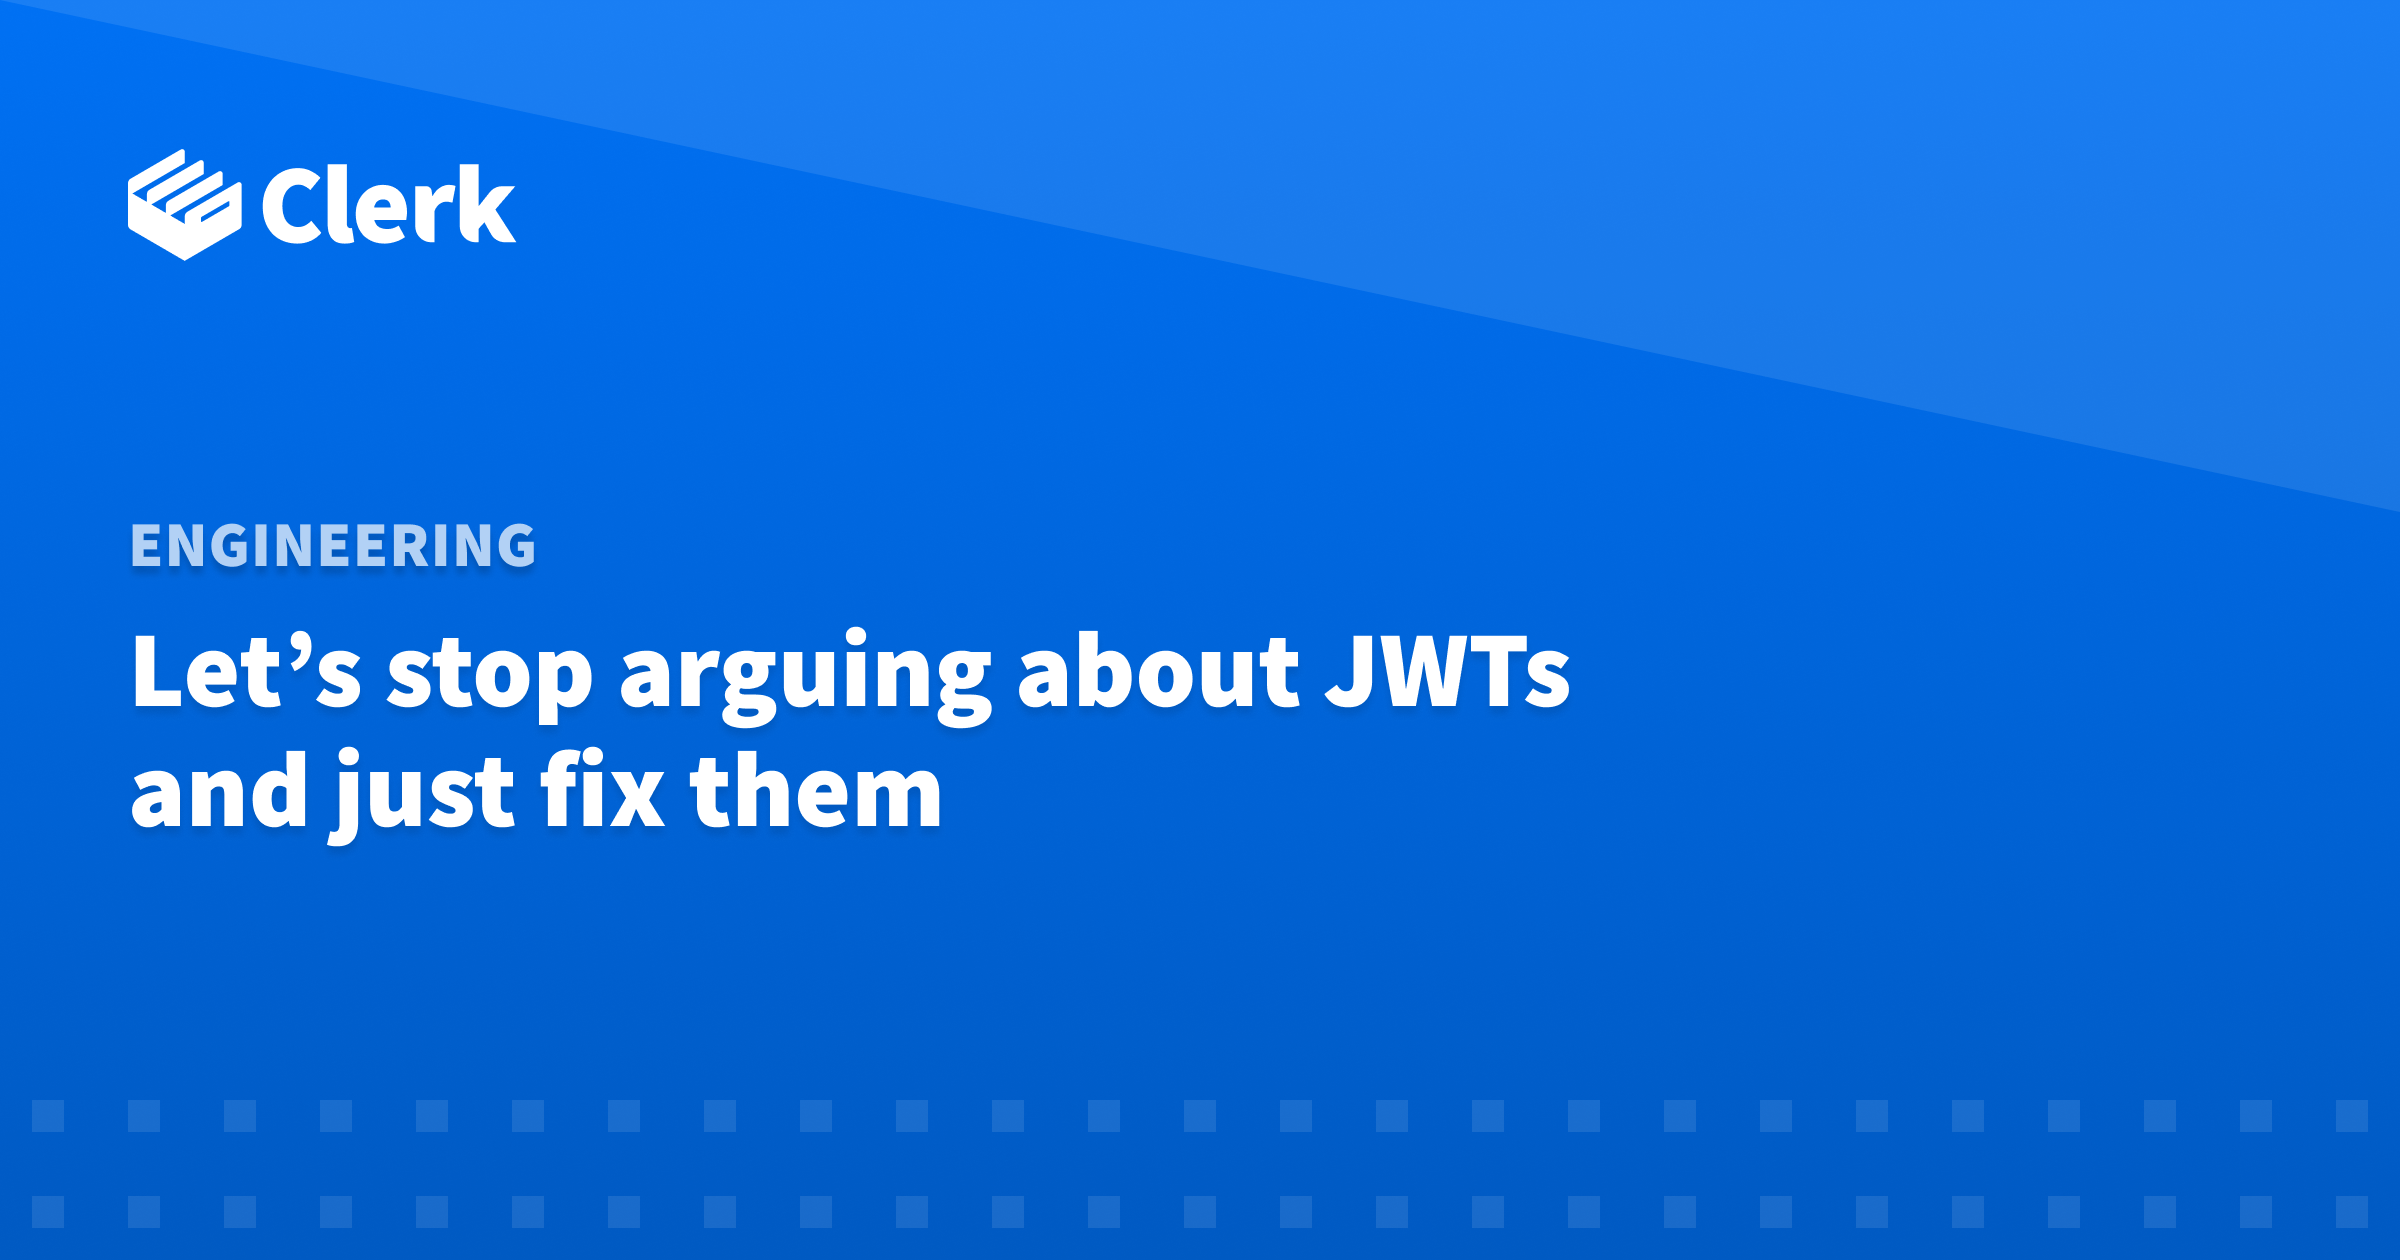 Let's stop arguing about JWTs and just fix them